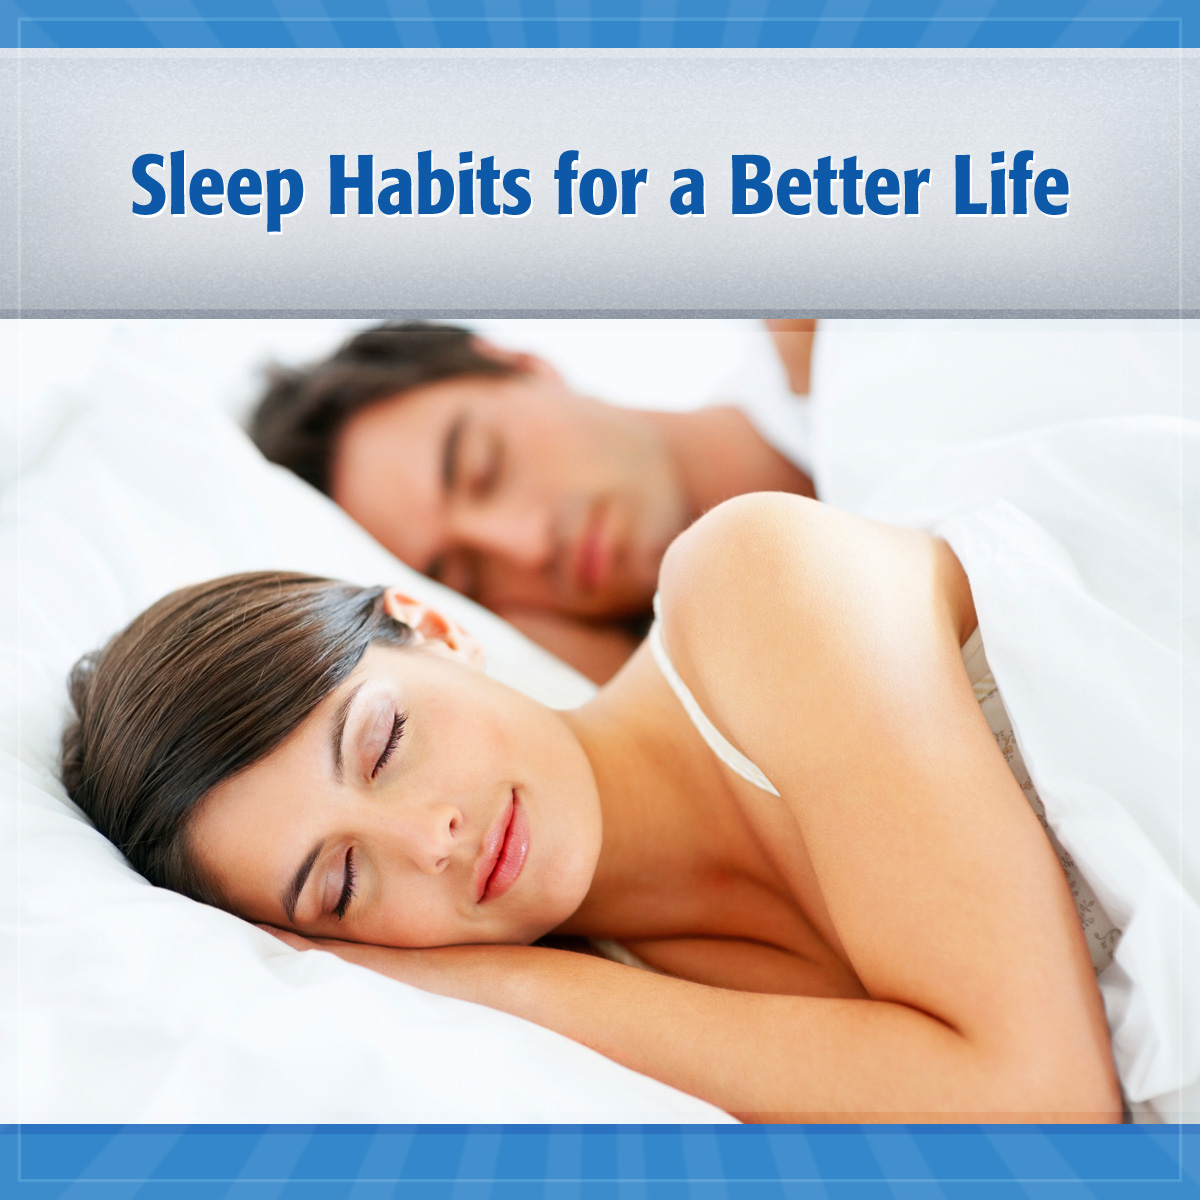 Sleep Habits for a Better Life